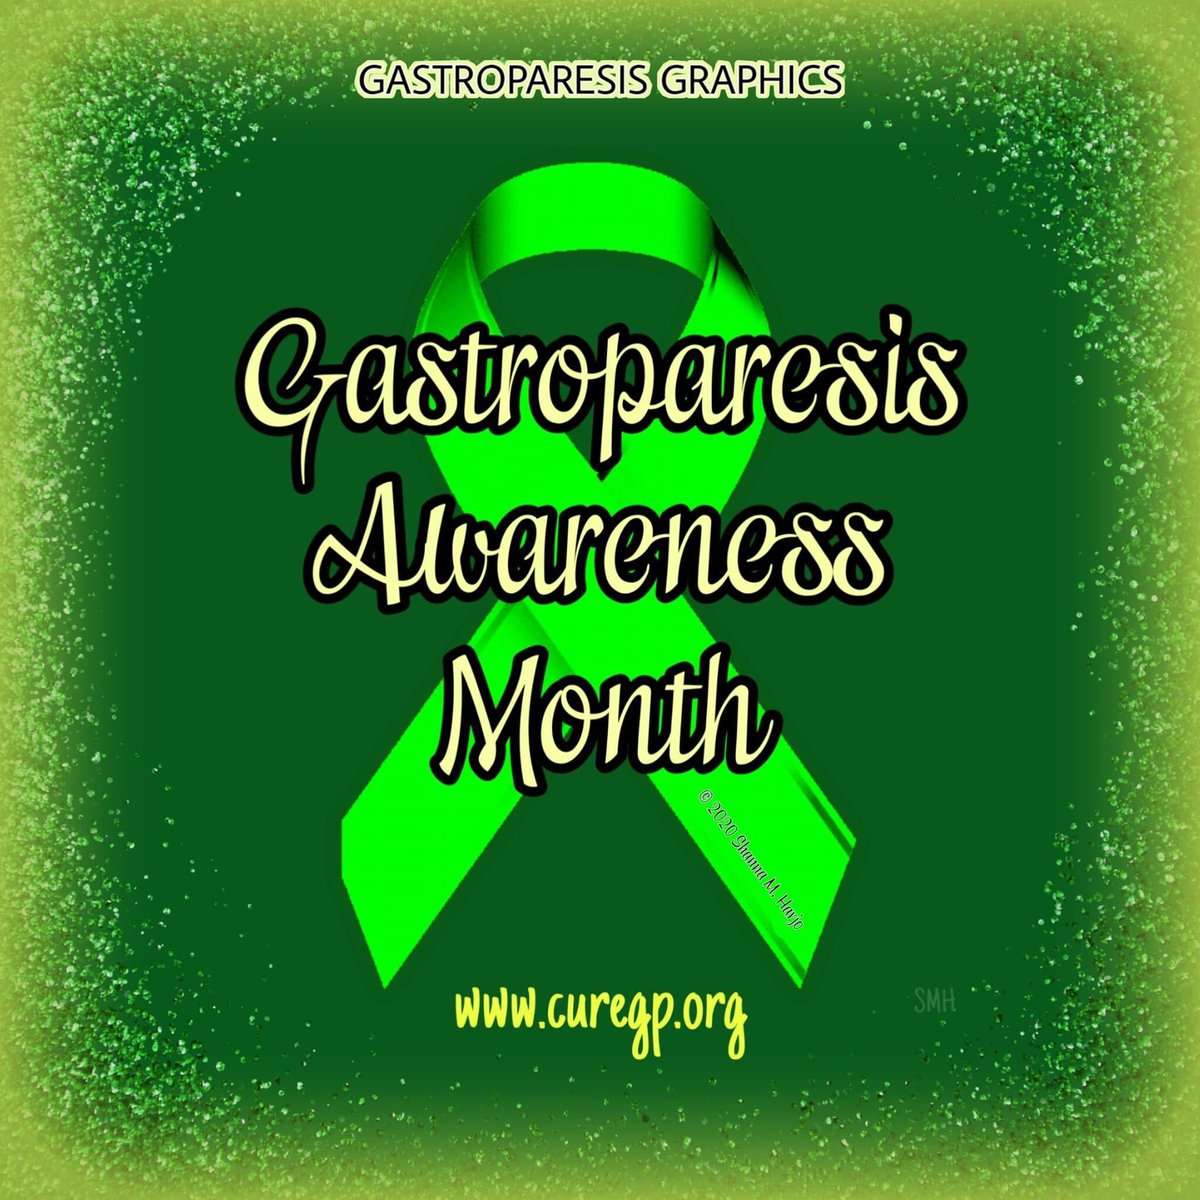 Gastroparesis Awareness Month 💚 Spreading awareness is important because it brings attention to disease many people know little about. #CureGP #Gastroparesis #GastroparesisWarrior #HR3396 #BeBold4GP #GastroparesisAwareness #ChronicIllness #InvisibleIllness #StarvingForACure